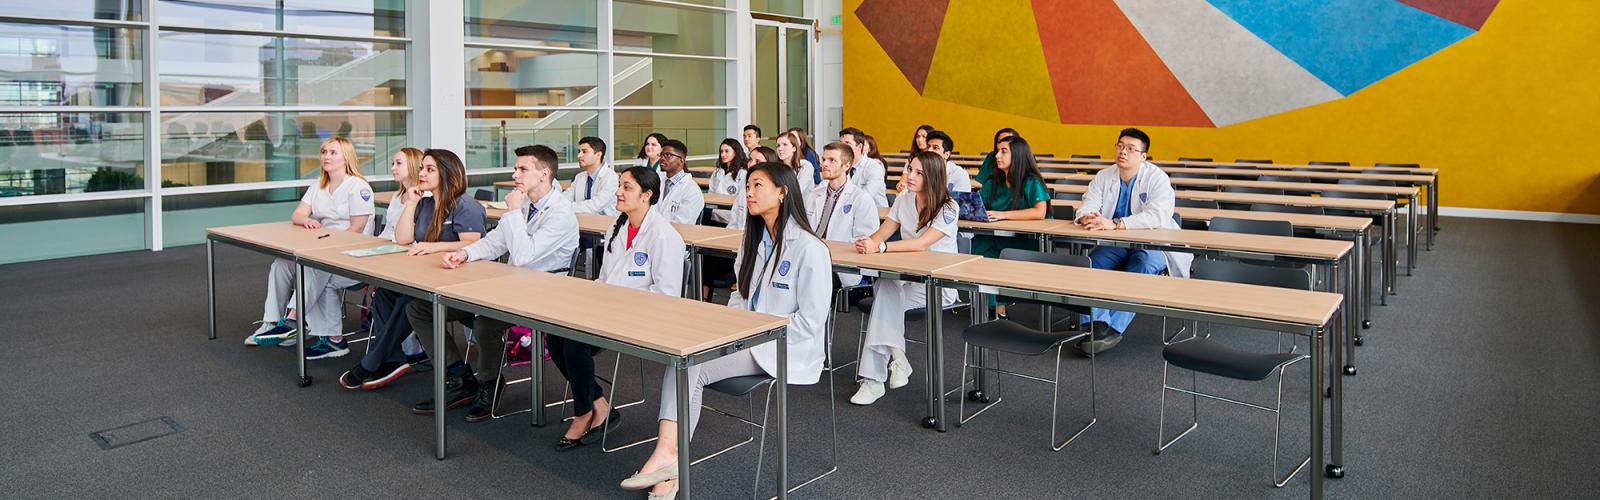 MD students in class at the Health Education Campus